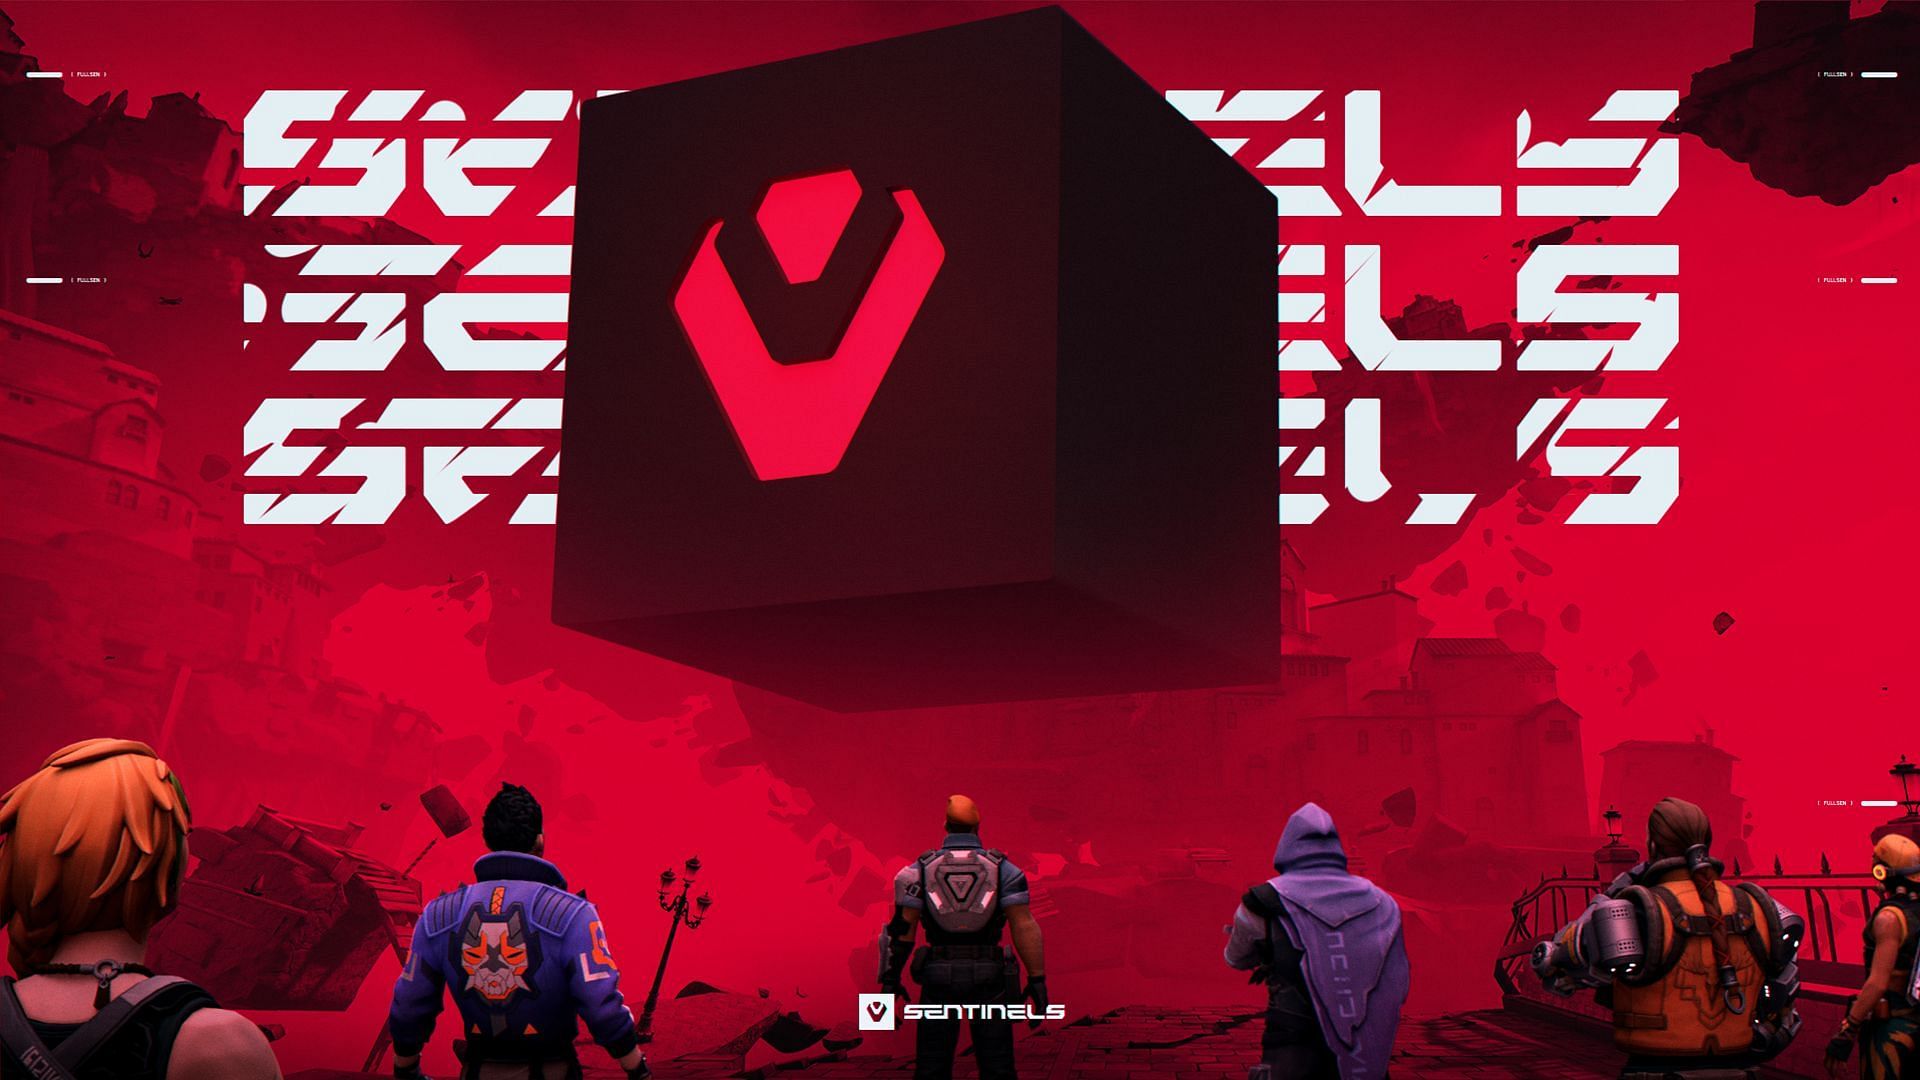 Sentinels have possibly announced their upcoming Valorant 2023 roster (Image via Sentinels)